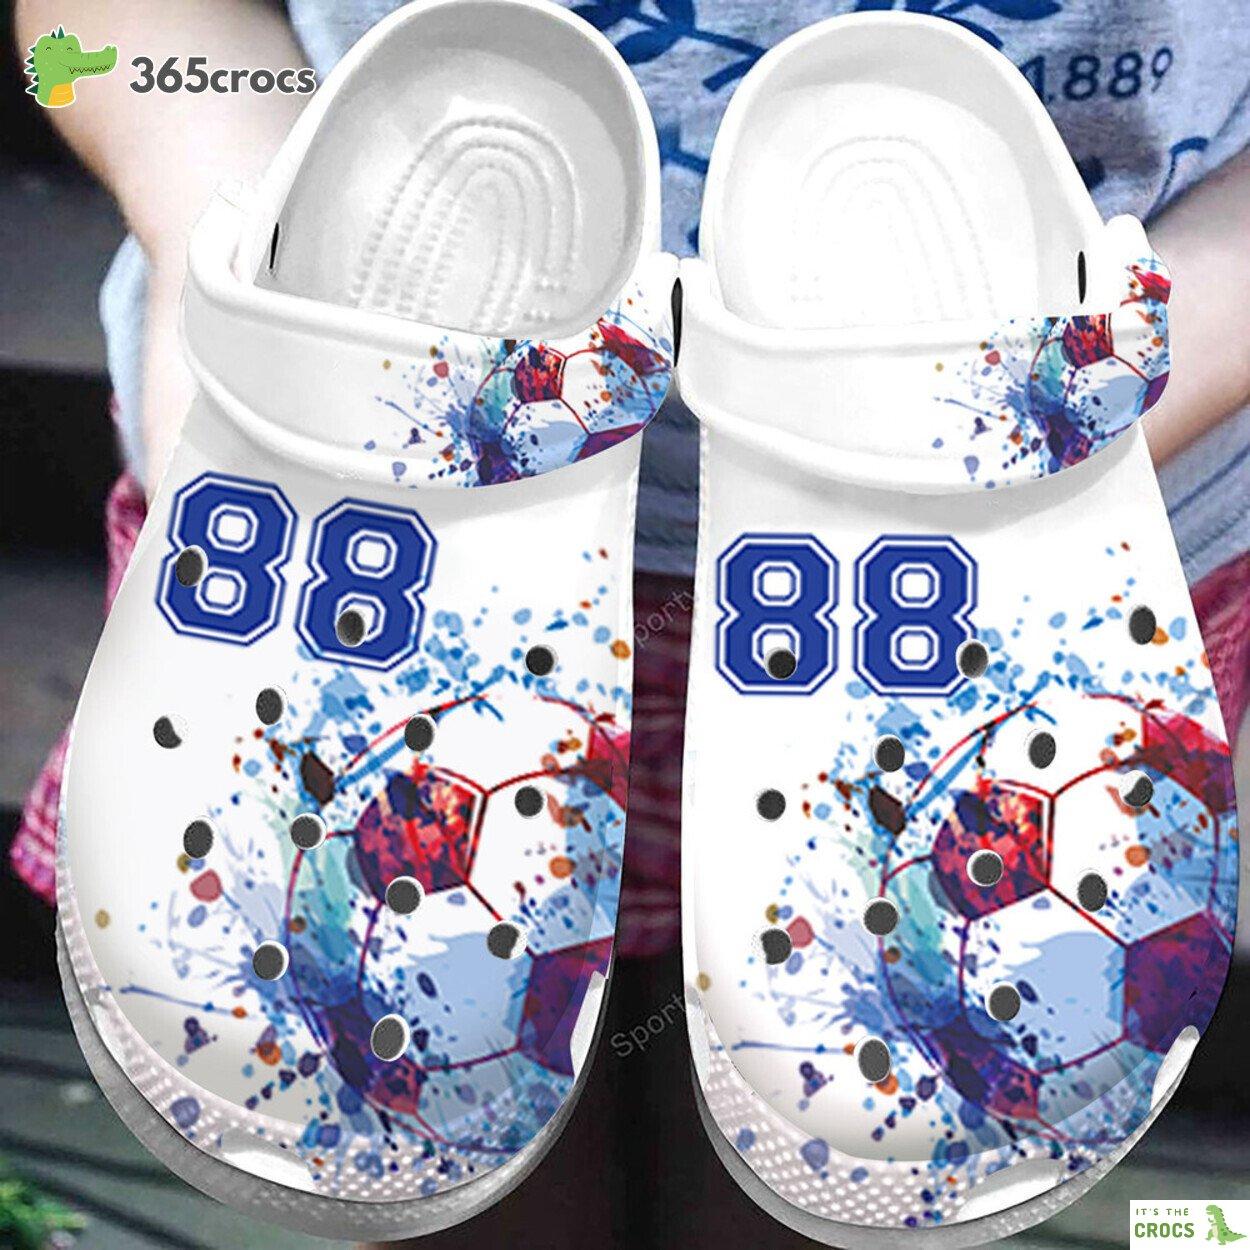 Watercolor Soccer Ball Design with Custom Number on Classic Clogs Shoes